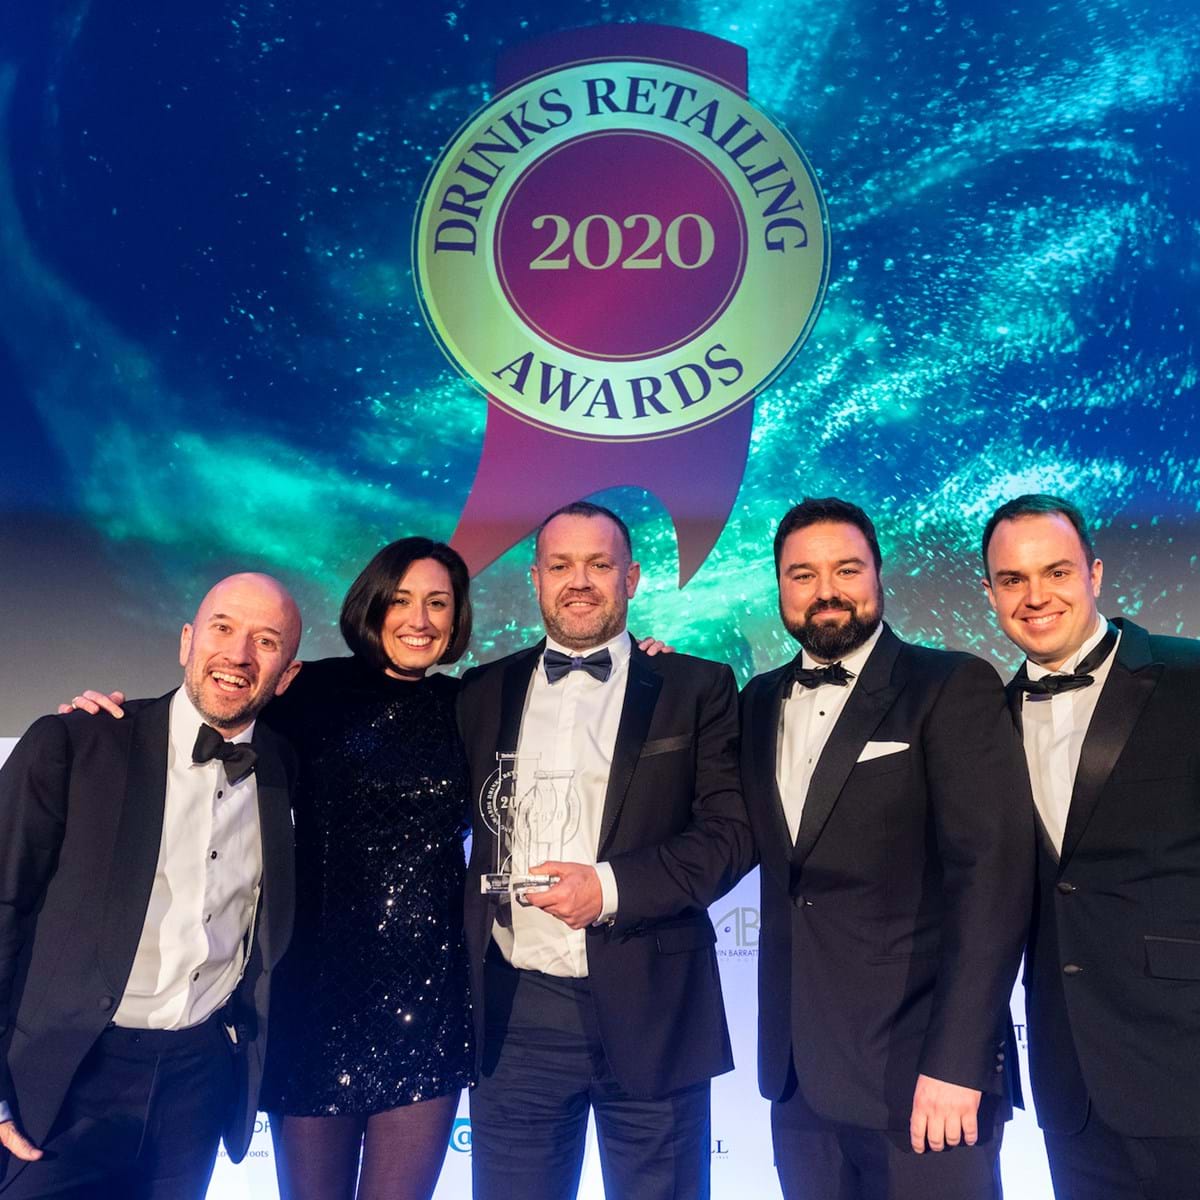 Dra 2020 Independent Wine Retailer Of The Year Dunell S